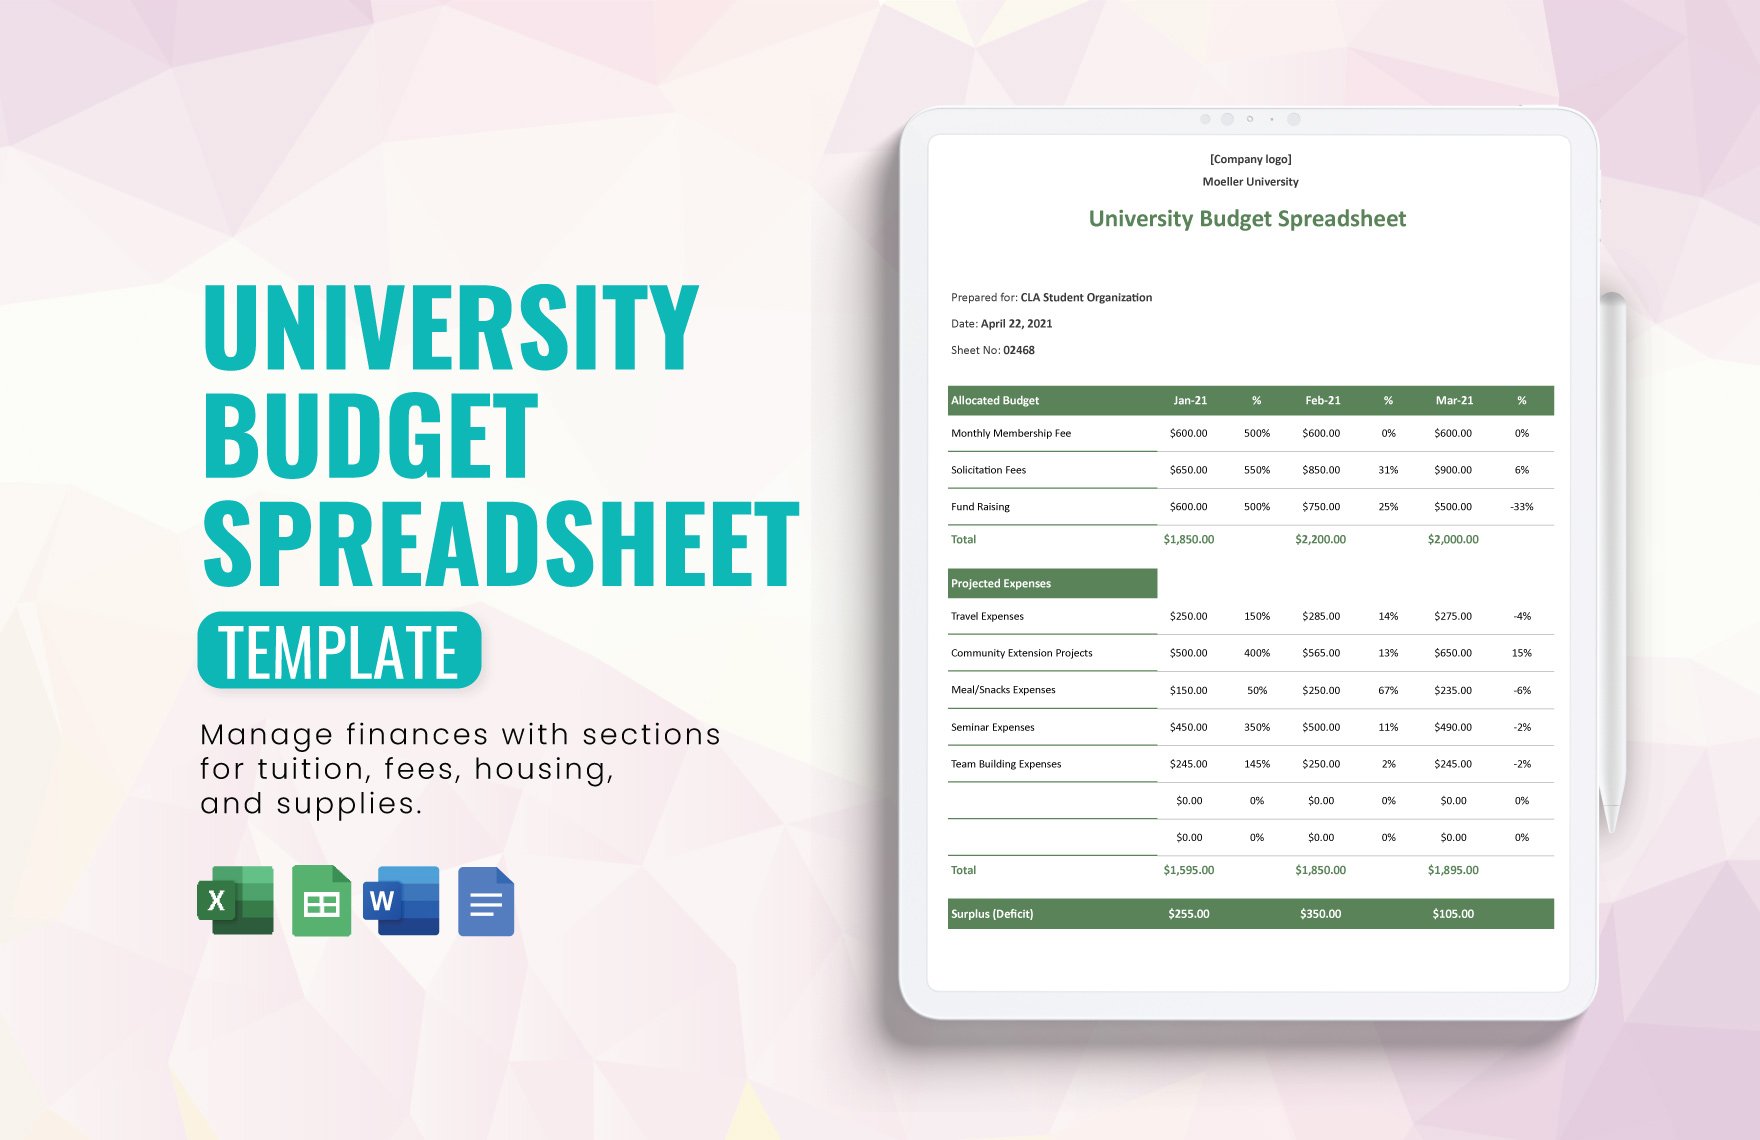 University Budget Spreadsheet Template in Word, Google Docs, Excel, Google Sheets